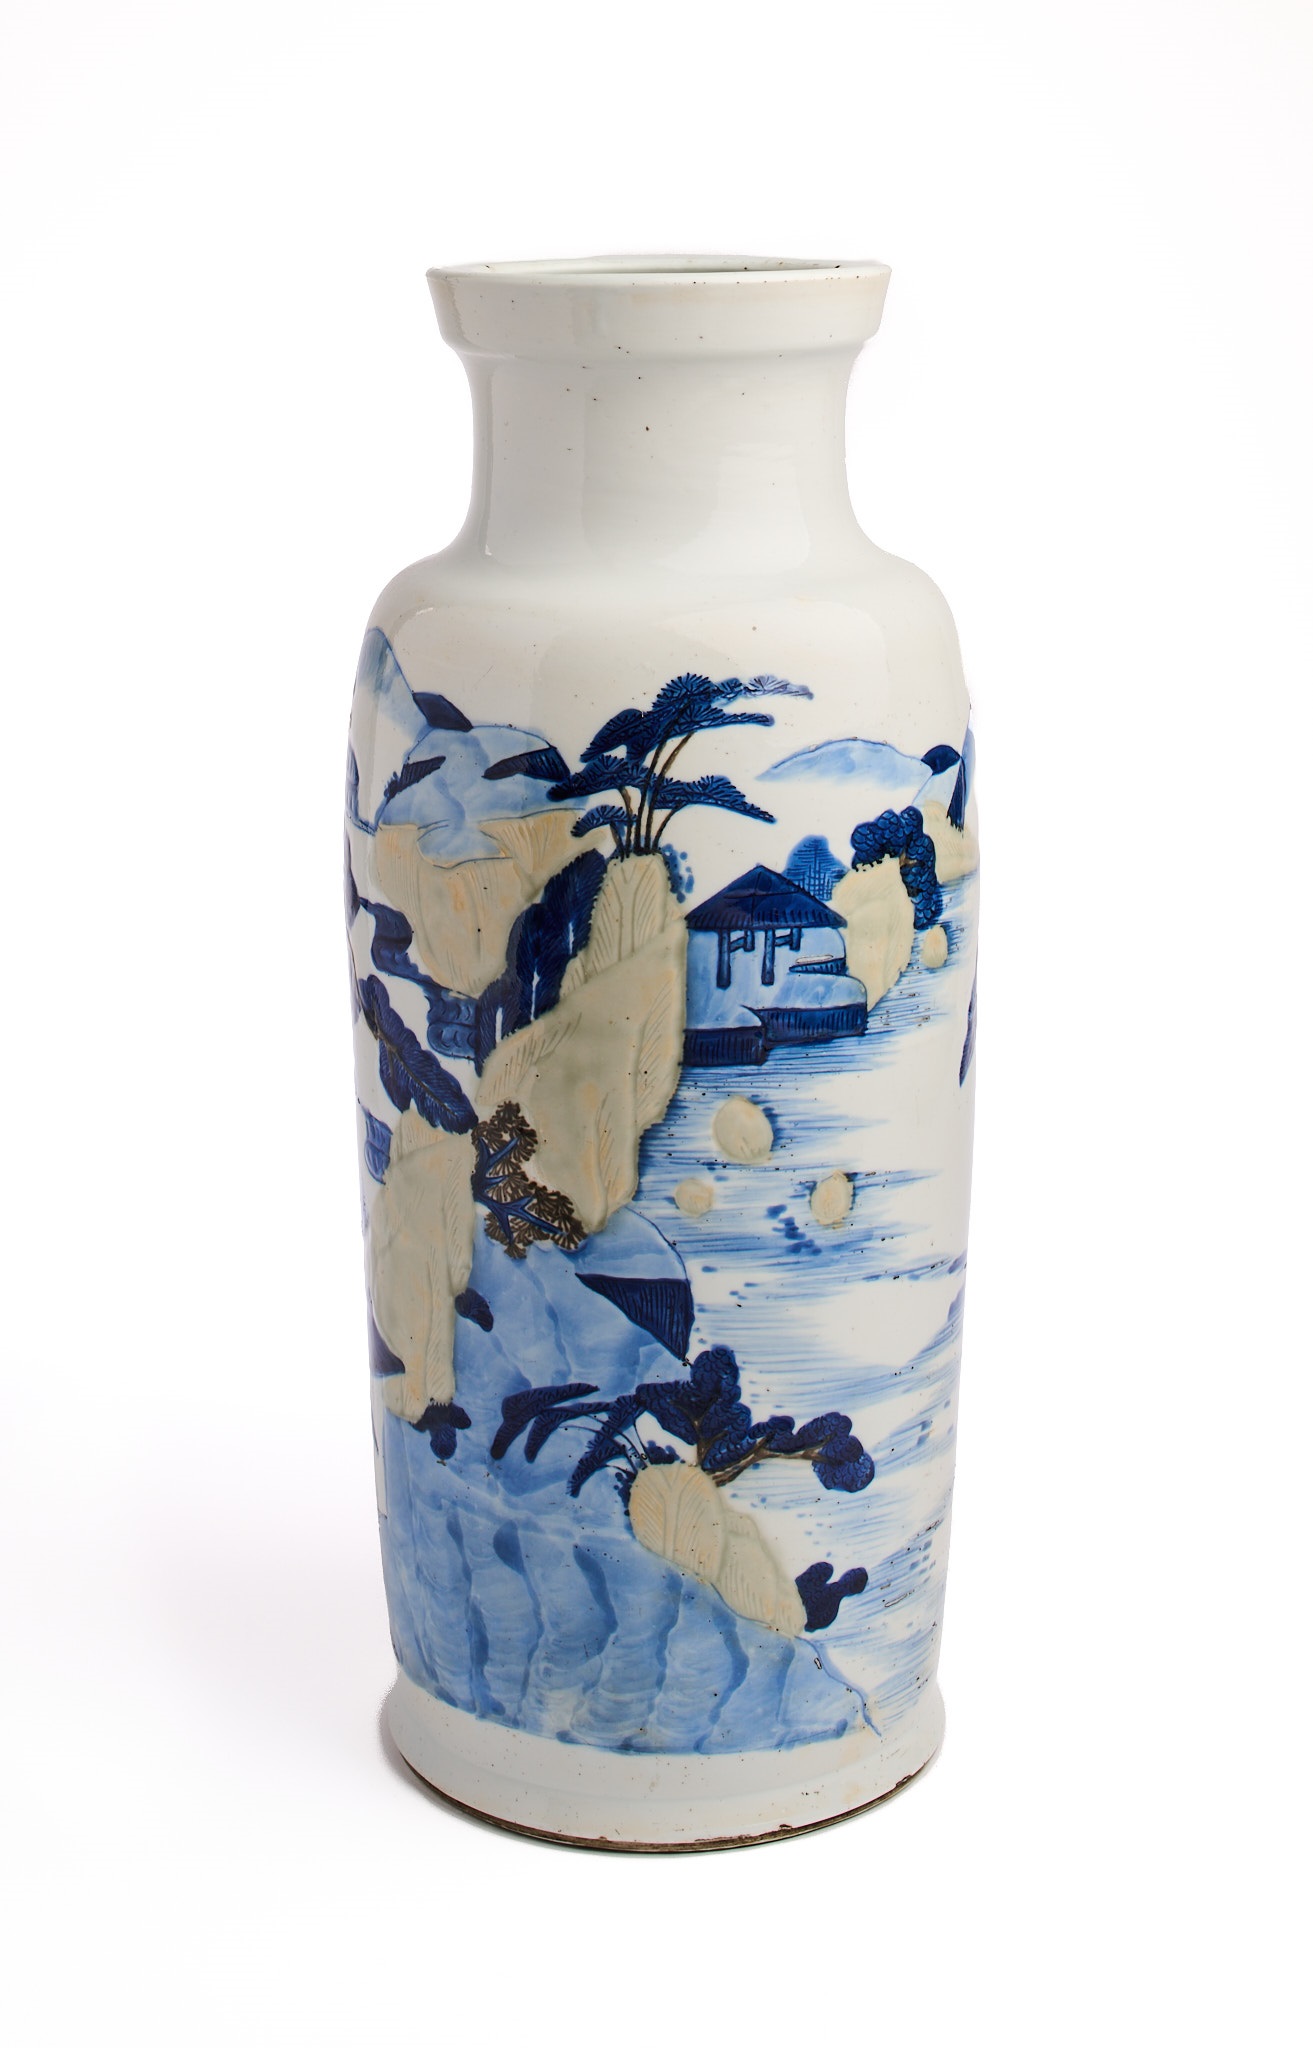 A CHINESE UNDERGLAZE-BLUE, COPPER RED, AND CELADON-GLAZED CARVED ROULEAU VASE, KANGXI PERIOD (1662-1